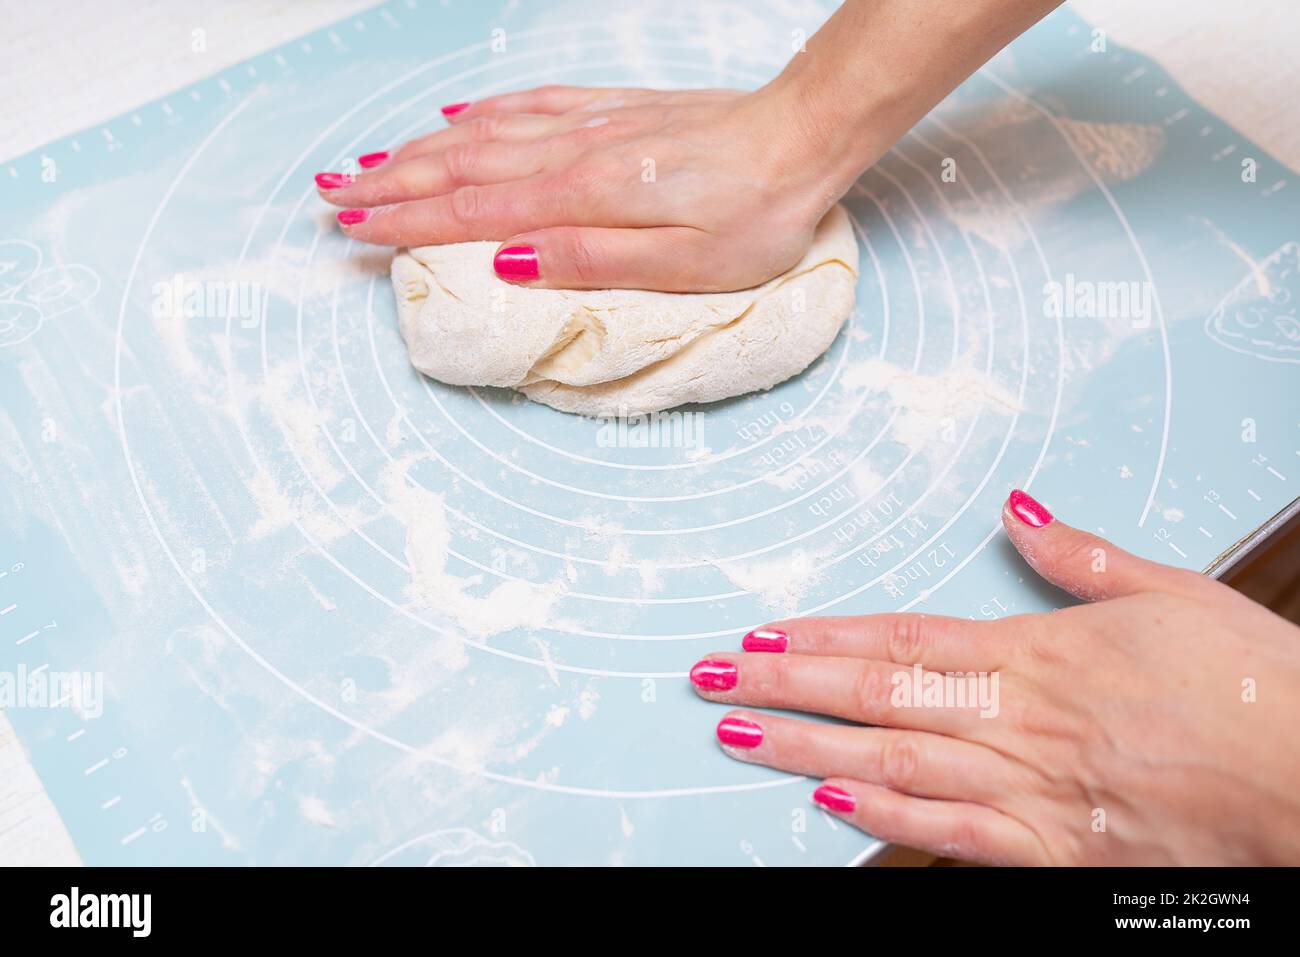 .Dough preparation, cooking at home. Female hands roll out the dough on a silicone mat. Stock Photo